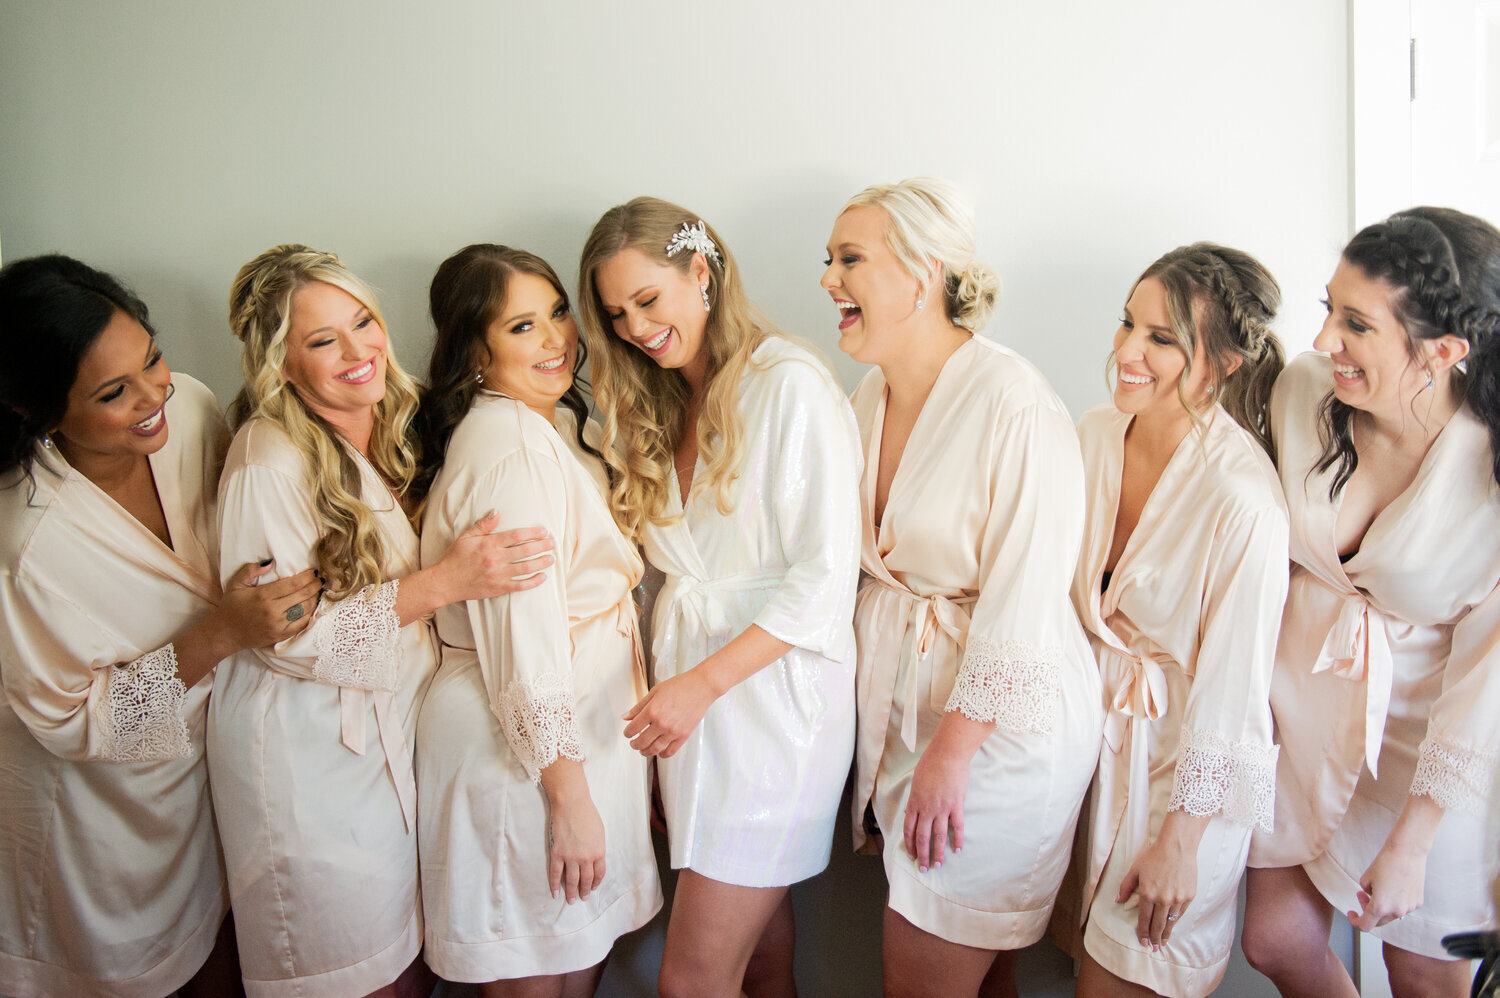  Lindsey and Clay real wedding in Hayley Paige Brando bridal gown  